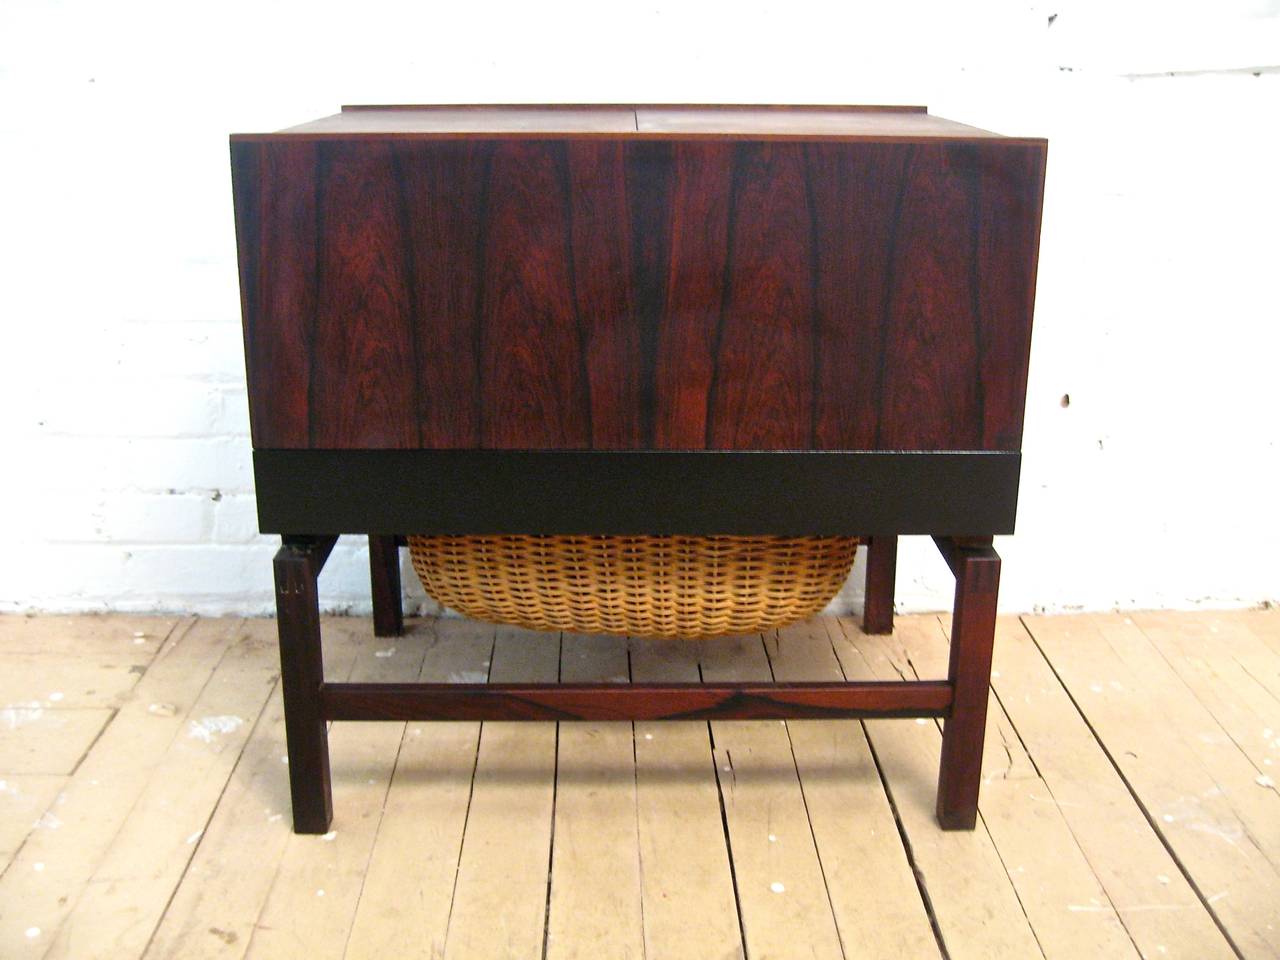 Wonderfully figured rosewood grain enhances this work table/sewing stand.  This piece features two slide down doors that hide the interior storage compartment and a black lacquered bottom drawer with wicker basket (meant for storing yarn, etc.). 